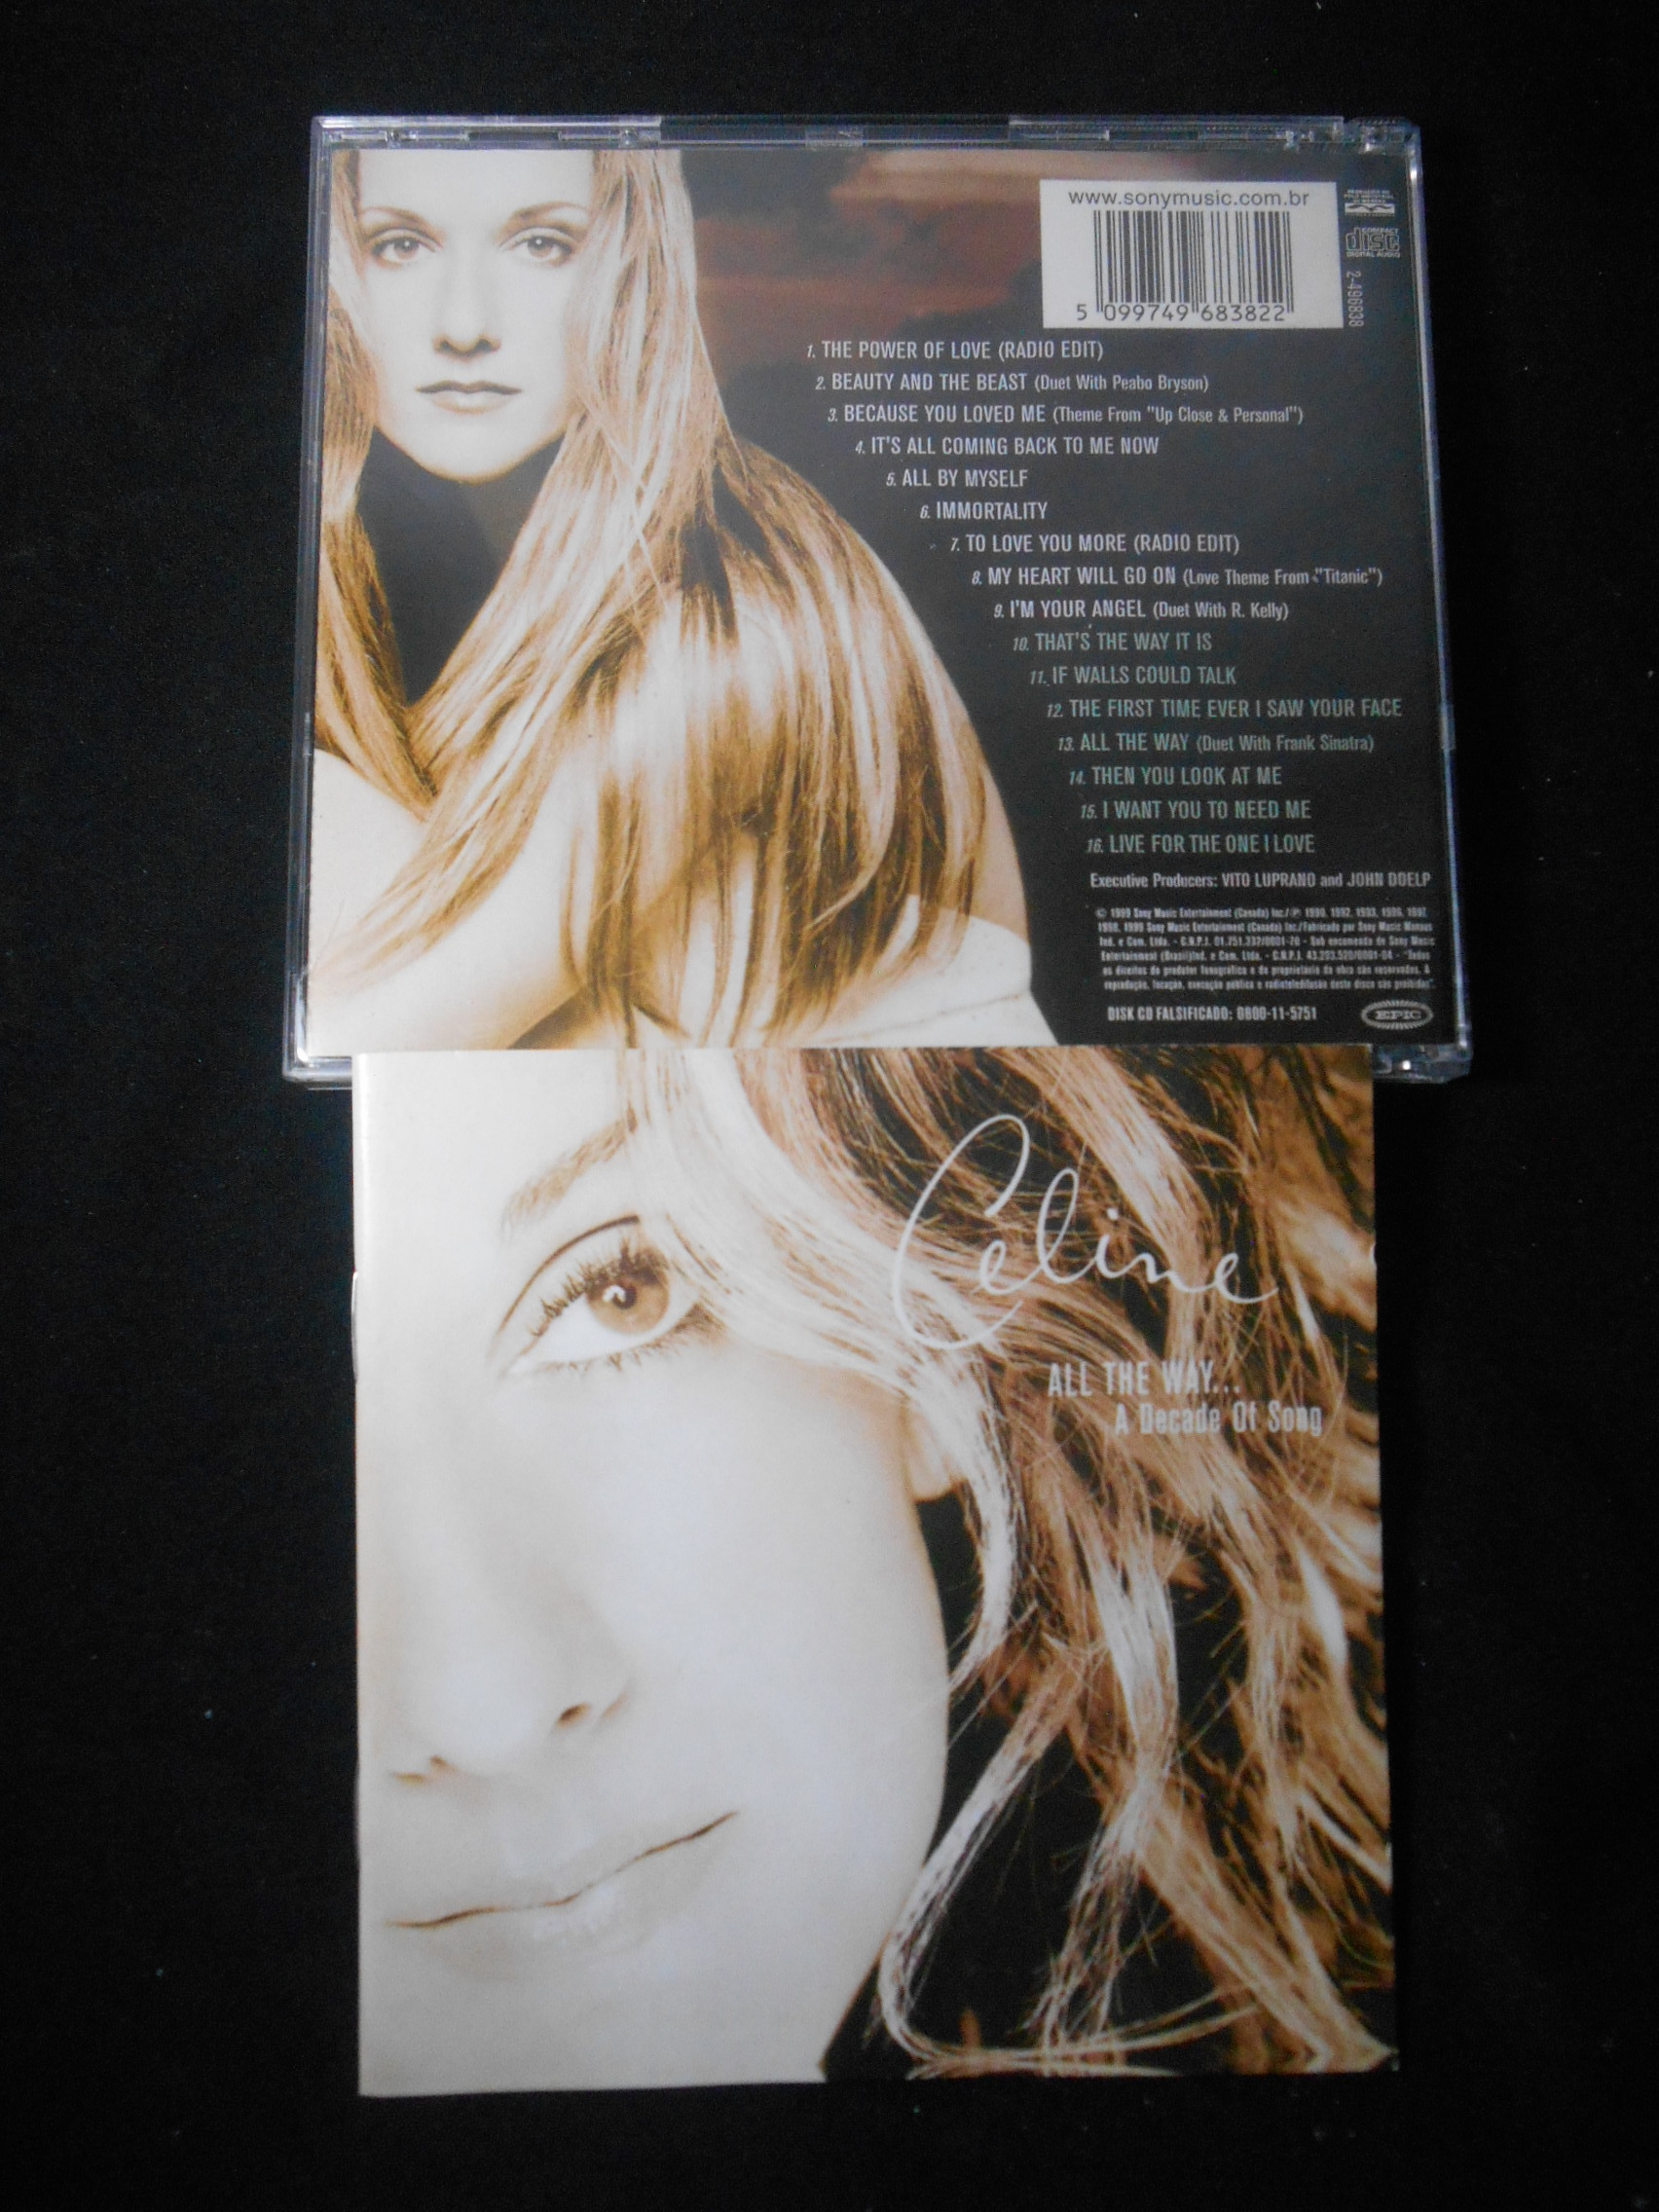 CD - Celine Dion - All The Way... A Decade Of Song